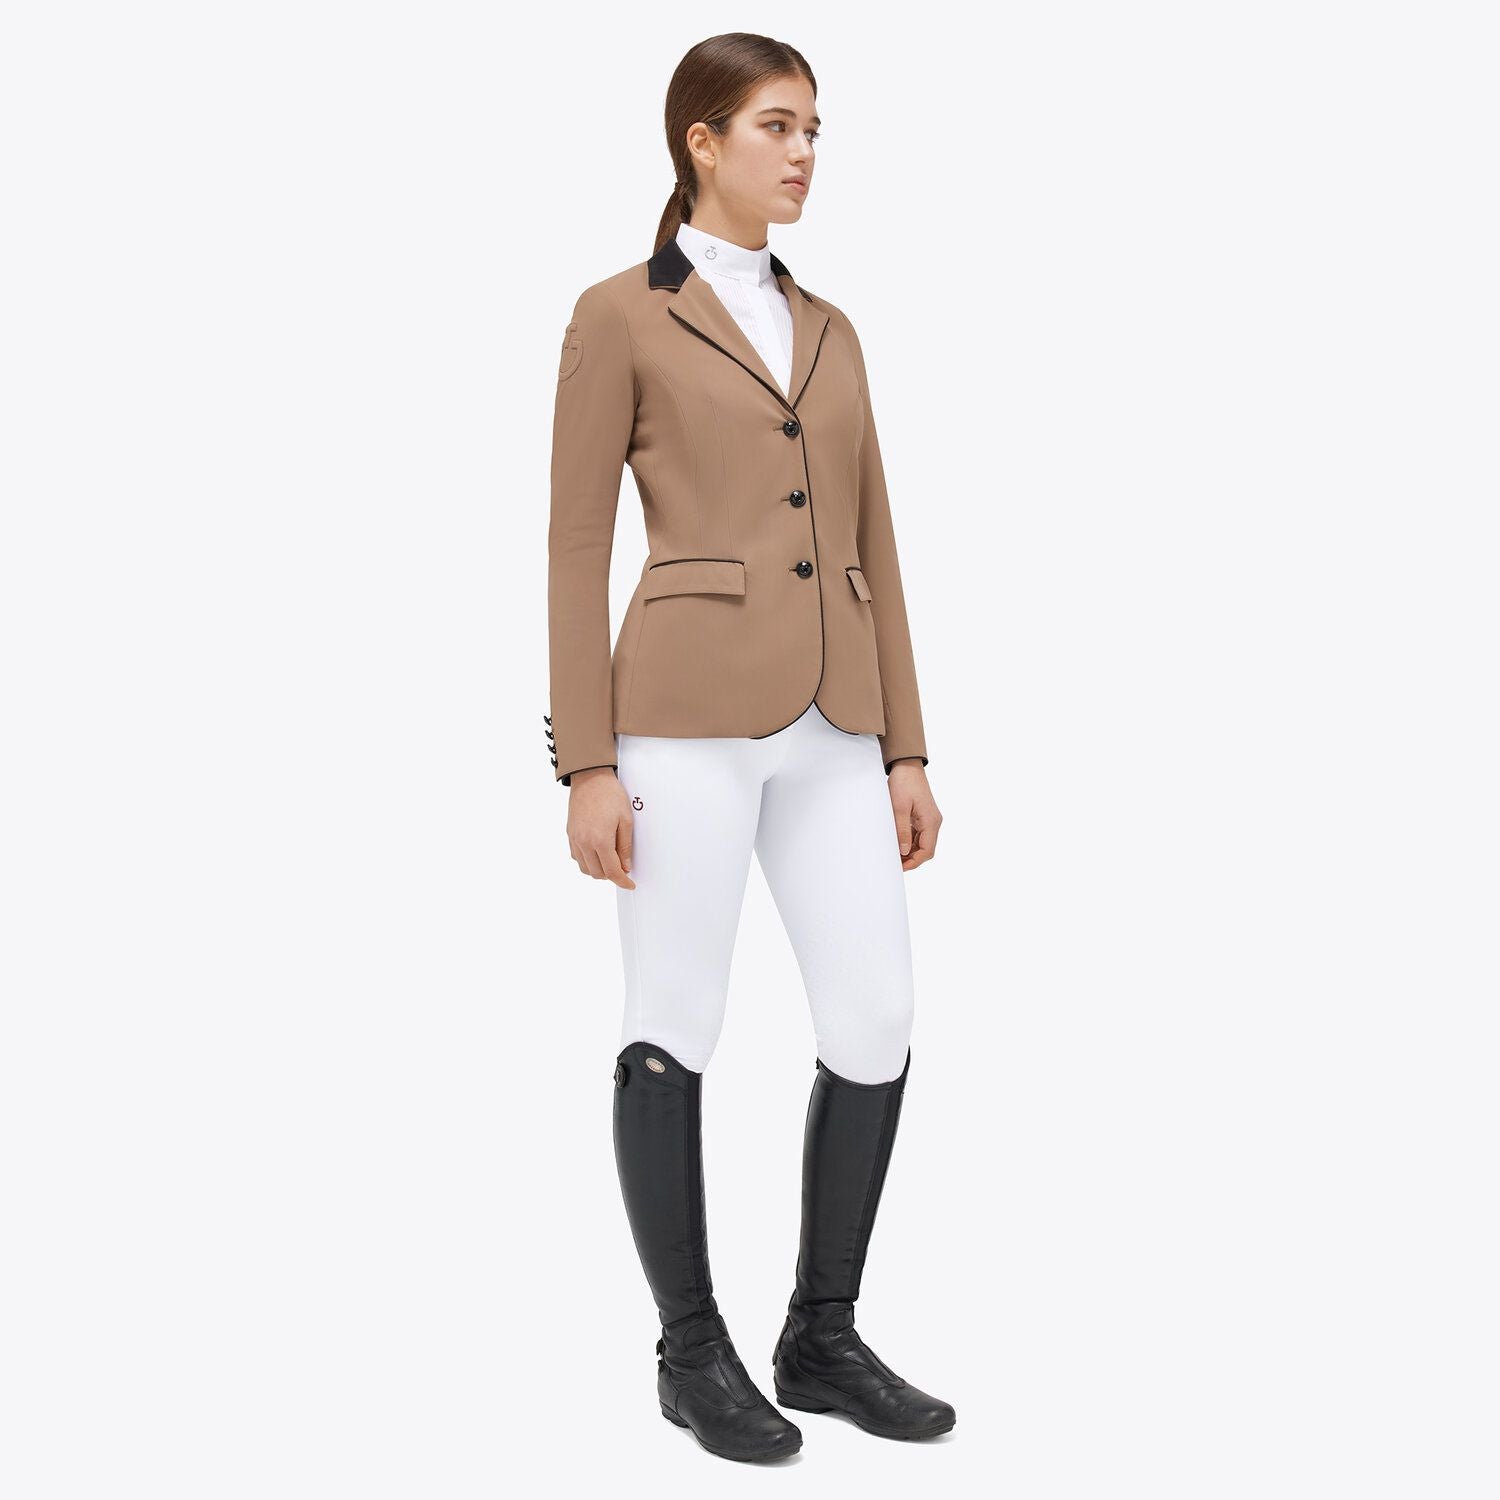 Cavalleria Toscana GP Showjacket - Cacao - only IT42 left